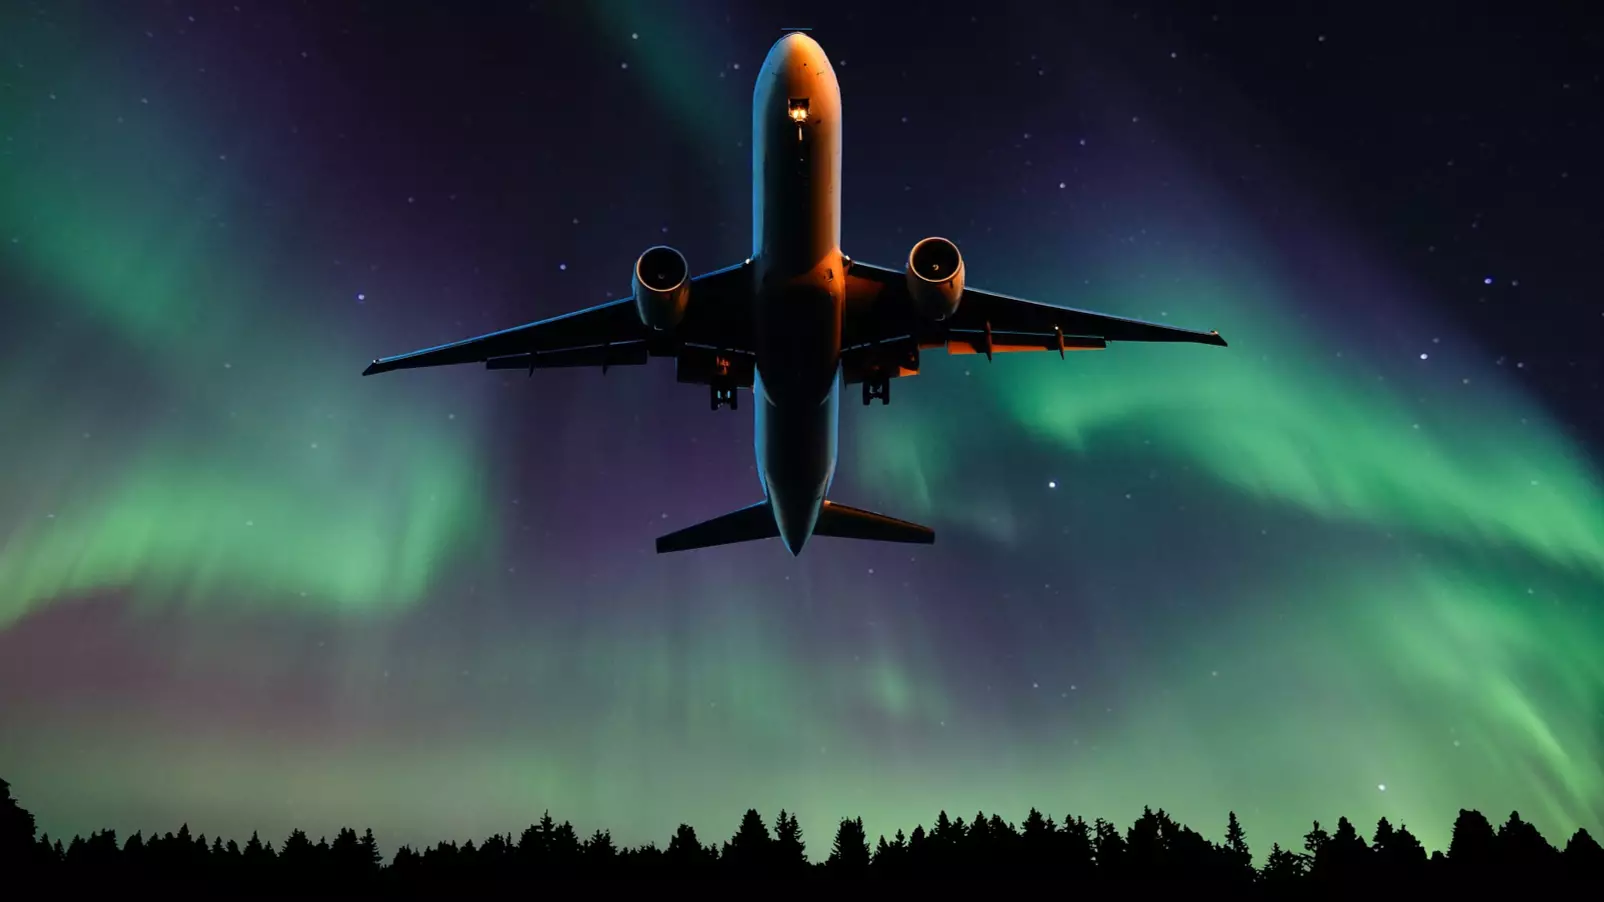 New Zealand Company Launches Flights To Let People See The Southern Lights